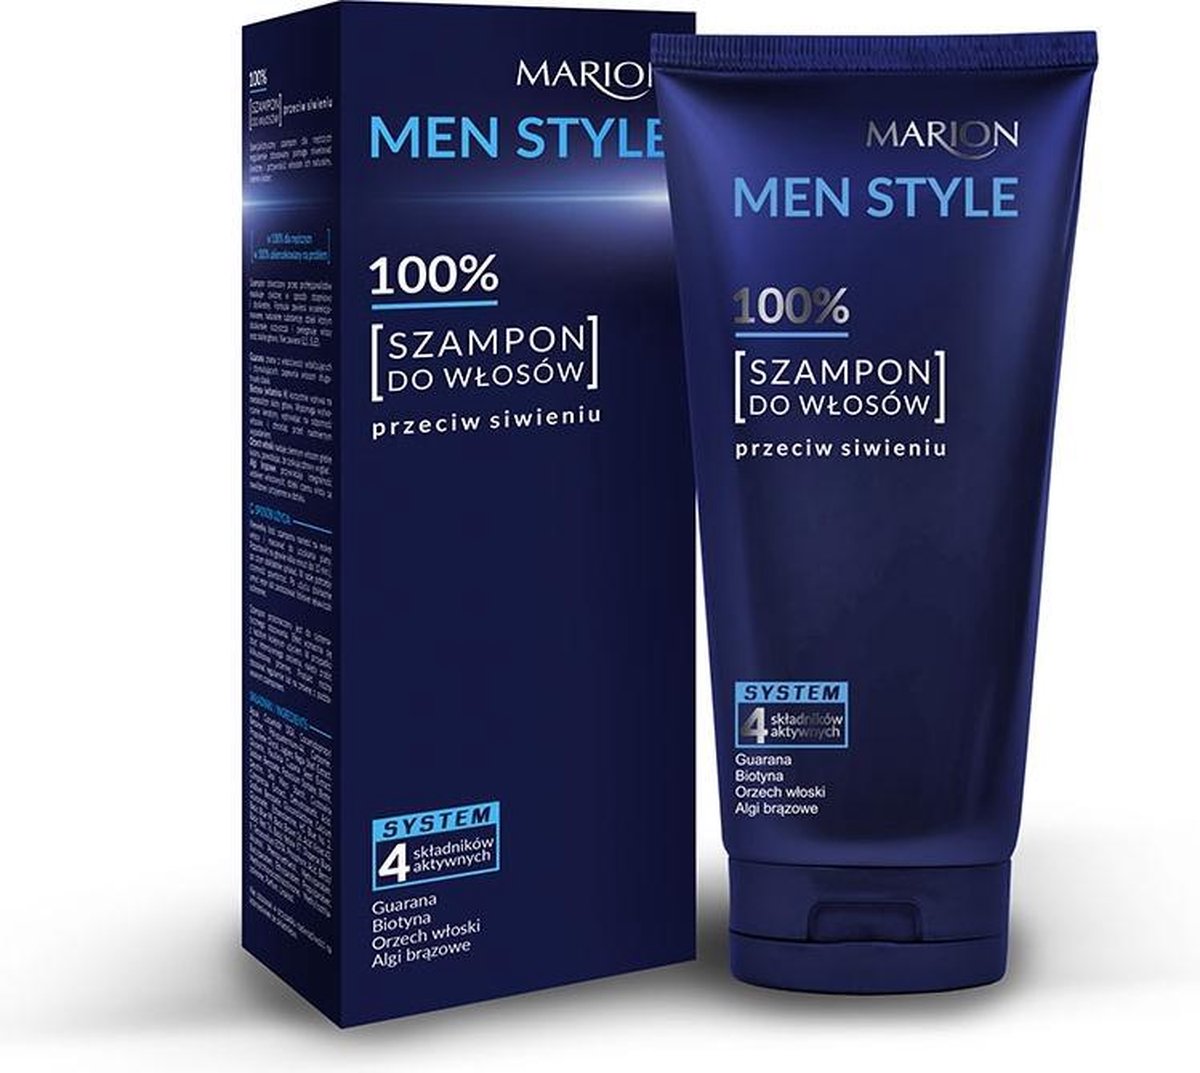 Marion - Men Style Shampoo Anti-Sowing Shampoo 150G - Marion